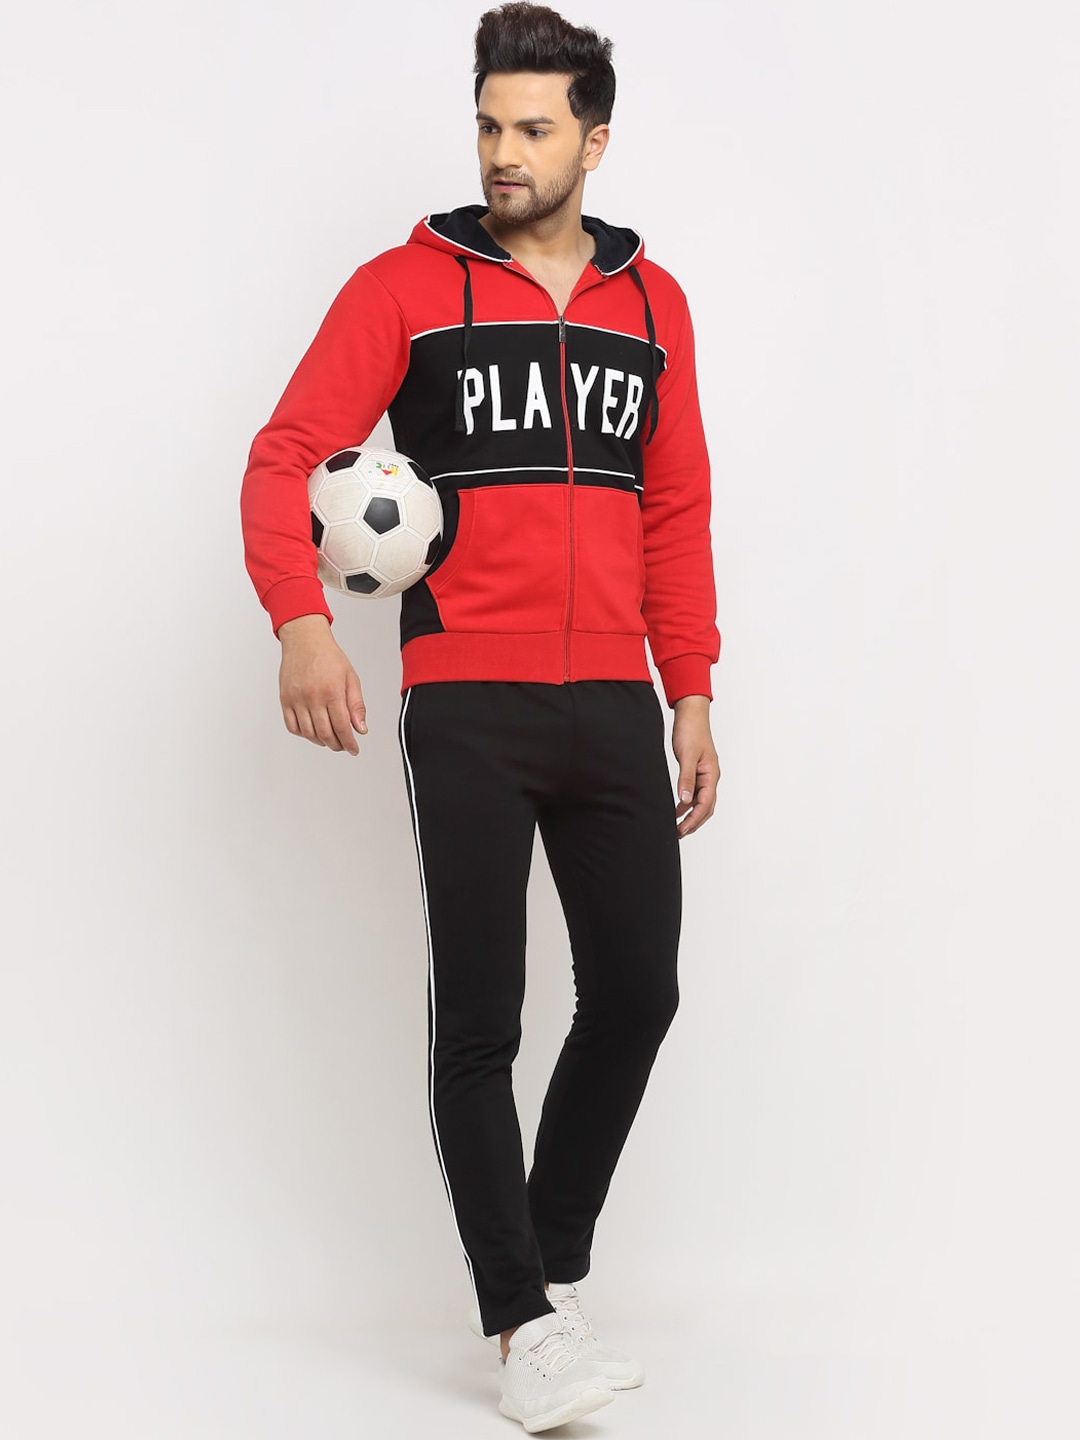 Clothing Tracksuits | WILD WEST Men Red & Black Colourblocked Cotton Tracksuit - VH31721